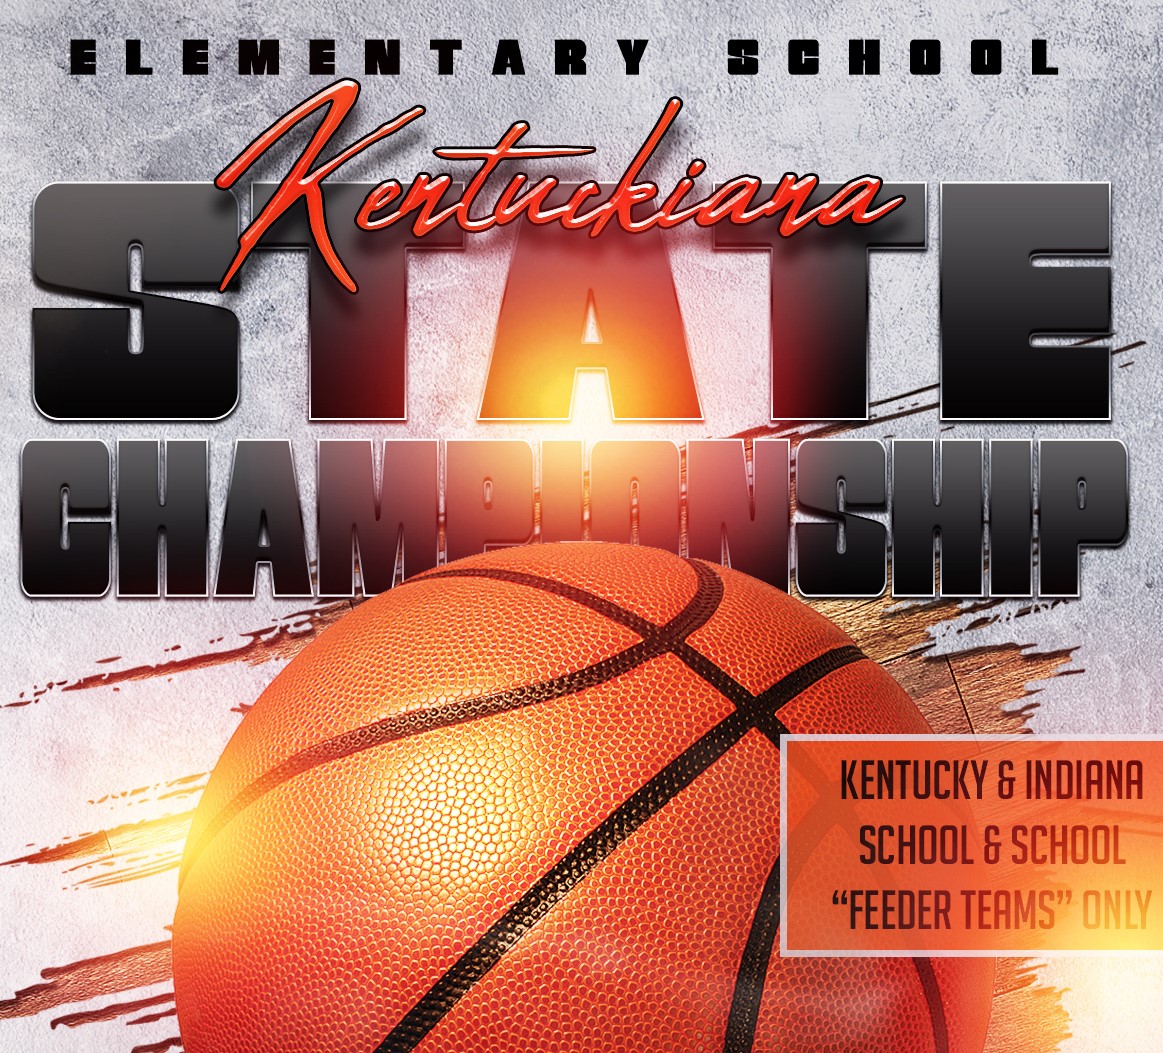 <strong><span style="font-size: 12pt;"><span style="background-color: #ffffff;"><span style="color: #ff6600;">Elementary School Kentuckiana<br />State Championship<br />Jan. 22-23, 2022</span></span><br /><a href="http://www.midwestbballtournaments.com/ViewEvent.aspx?EID=942">Click Here for Info. </a></span></strong>